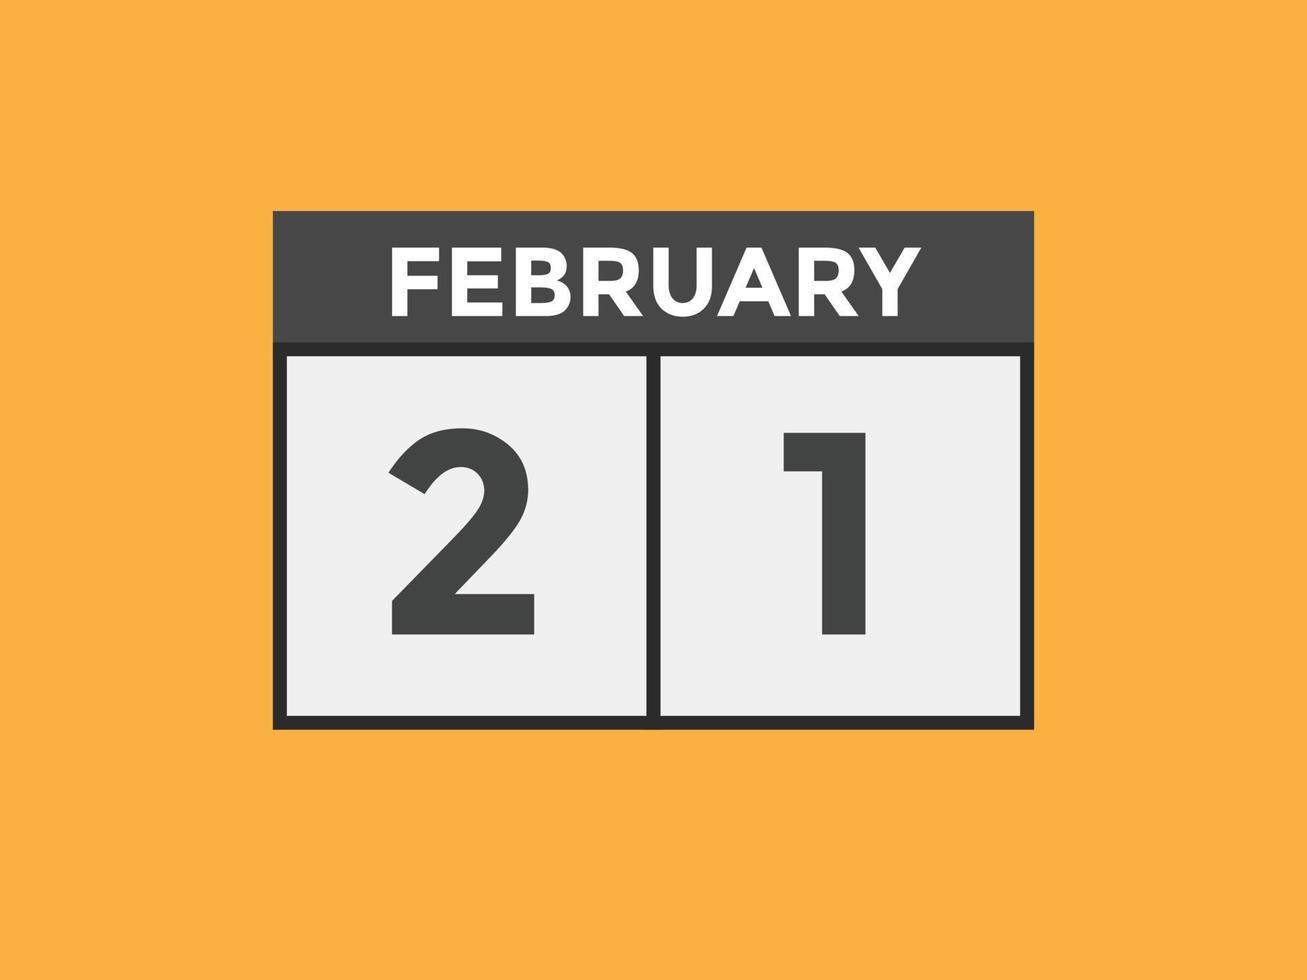 february 21 calendar reminder. 21th february daily calendar icon template. Calendar 21th february icon Design template. Vector illustration